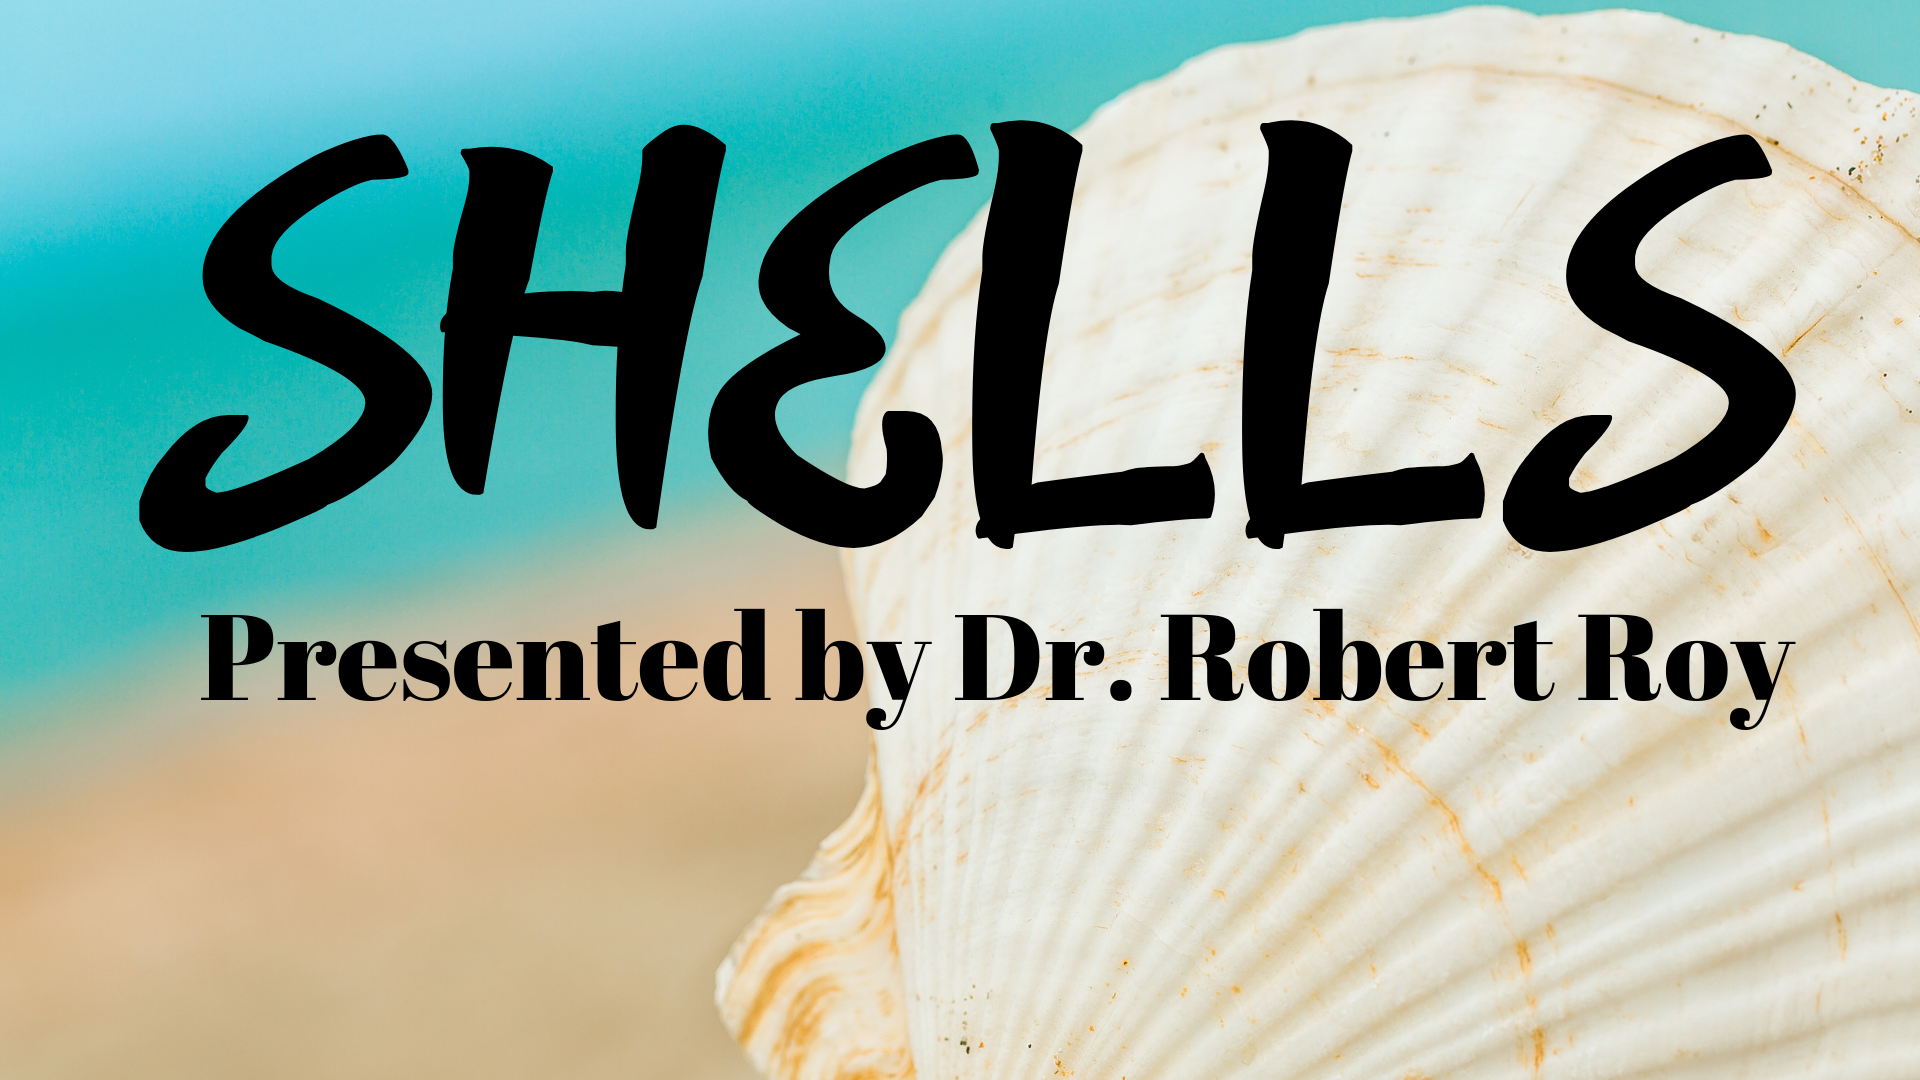 Shells with Dr. Robert Roy